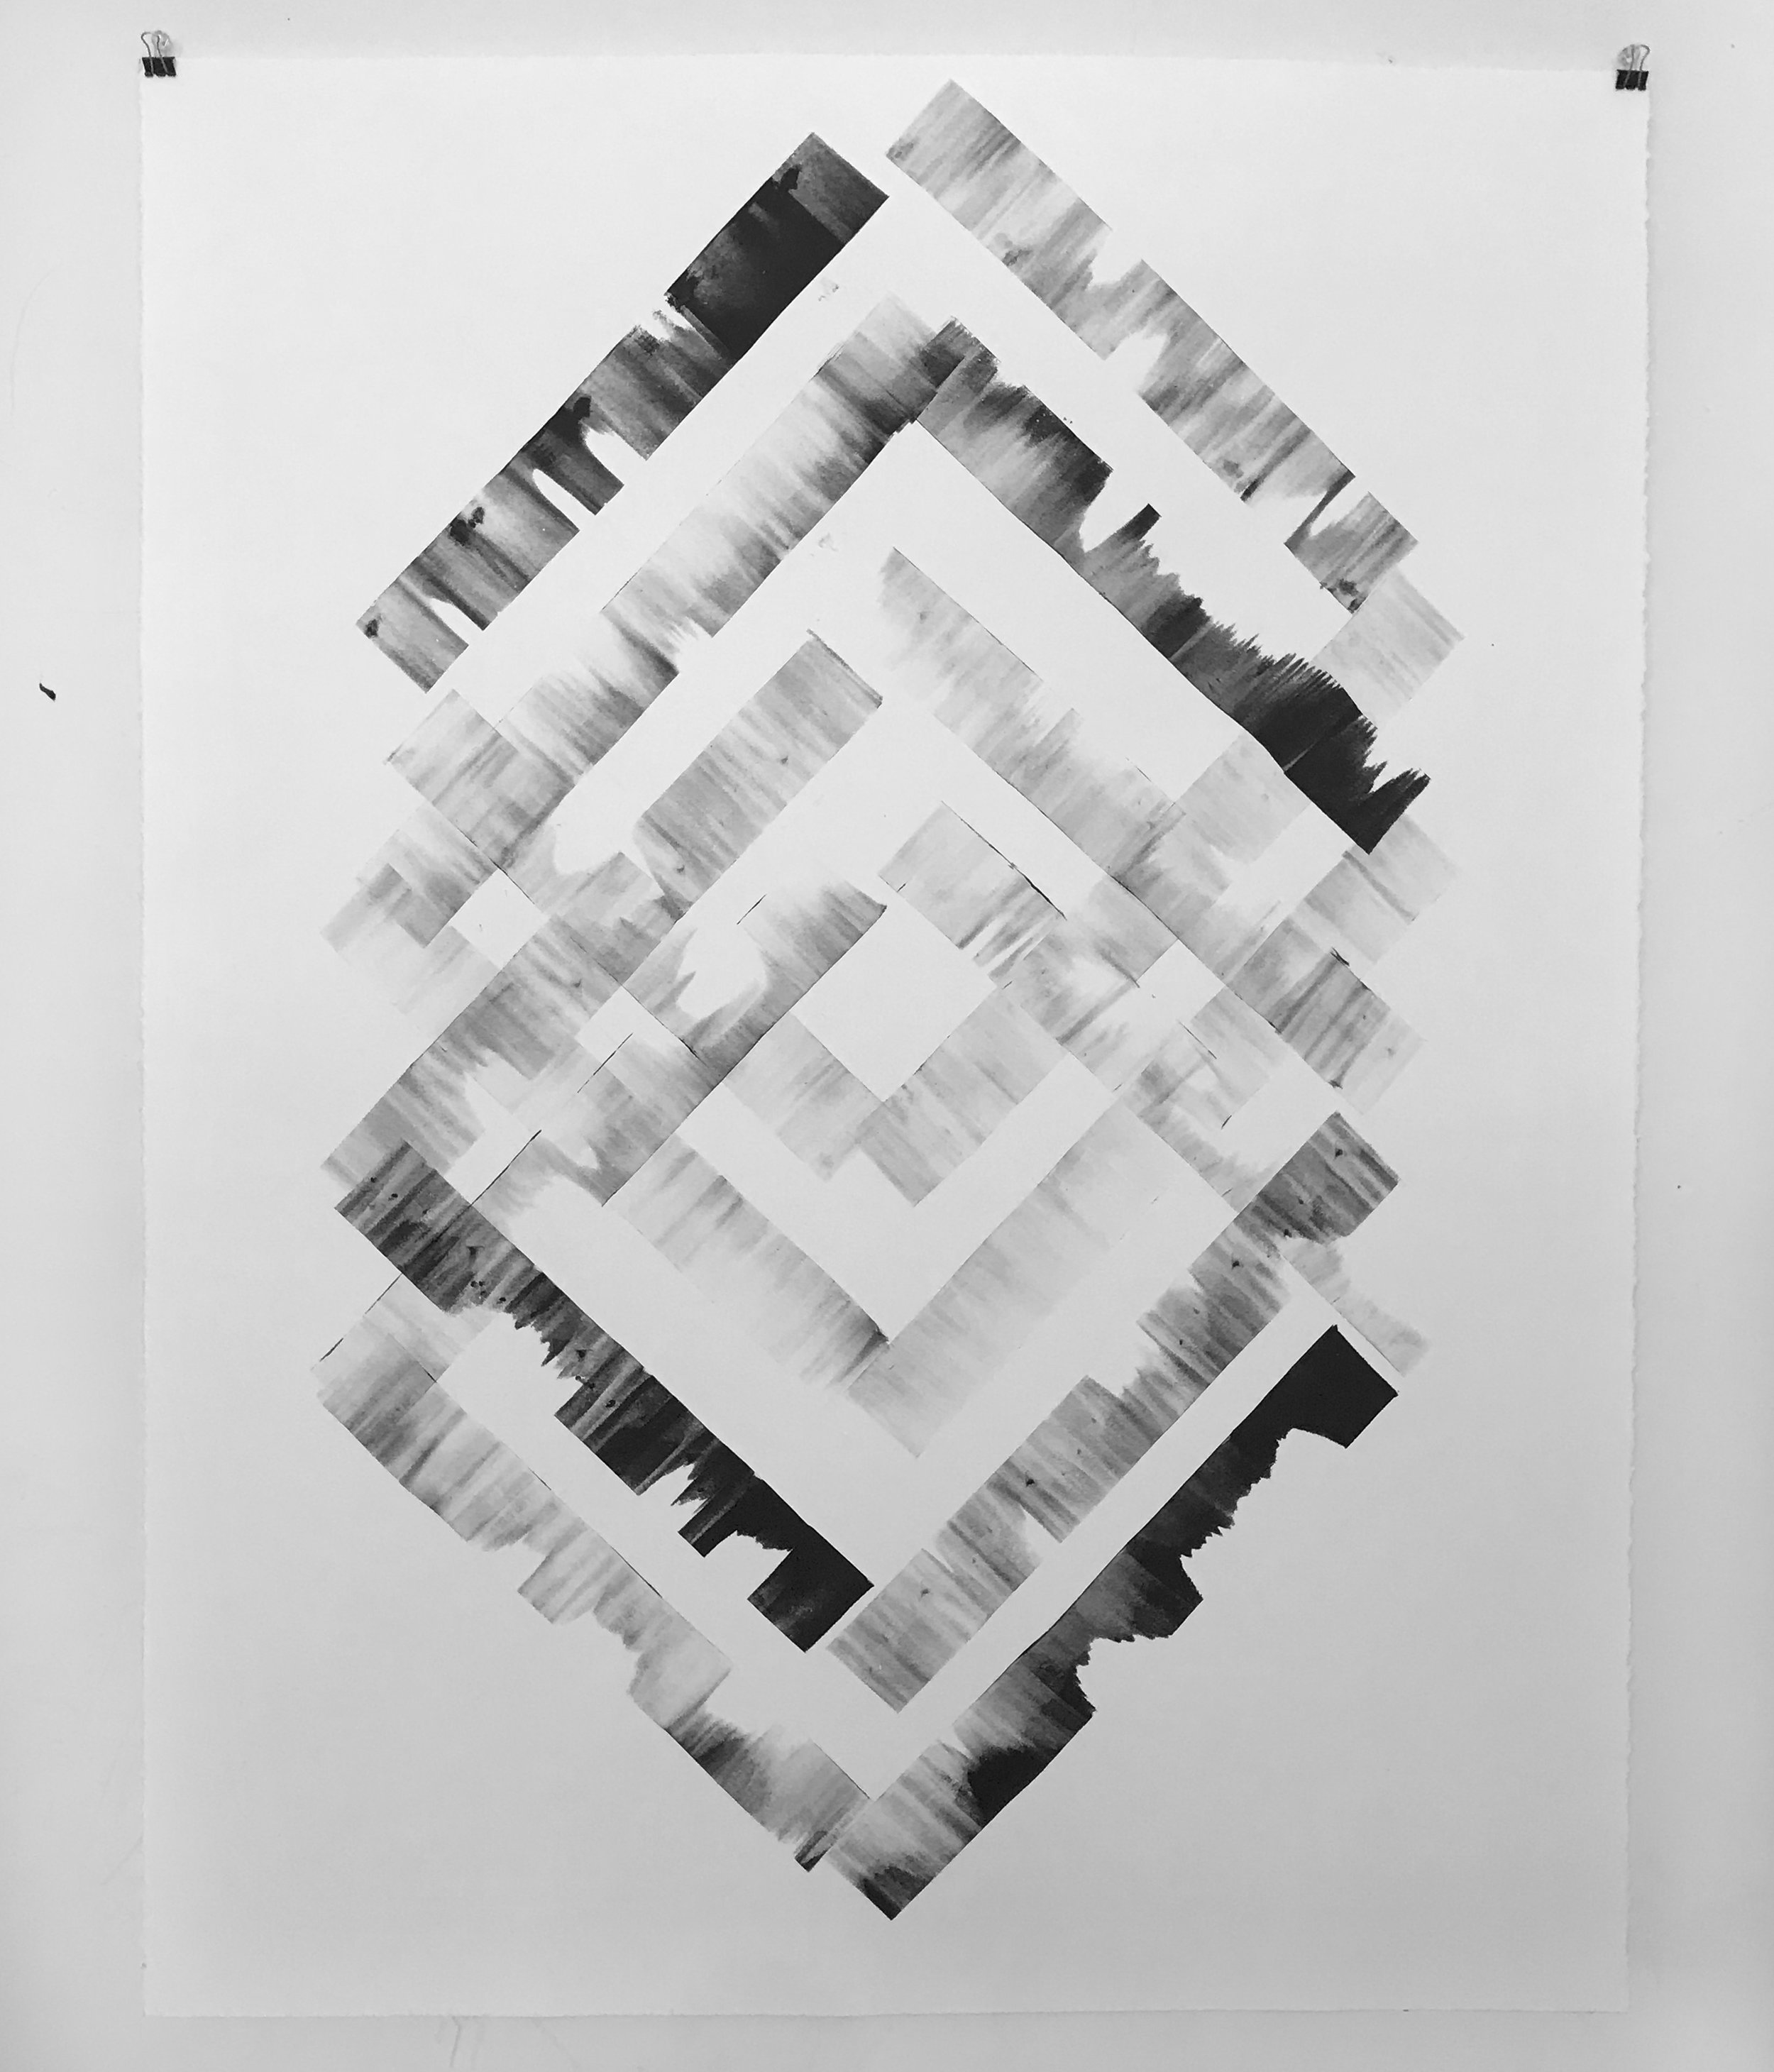  Diamond Movement, 2019, Litho ink on paper, 50 x 38 inches (unframed) 